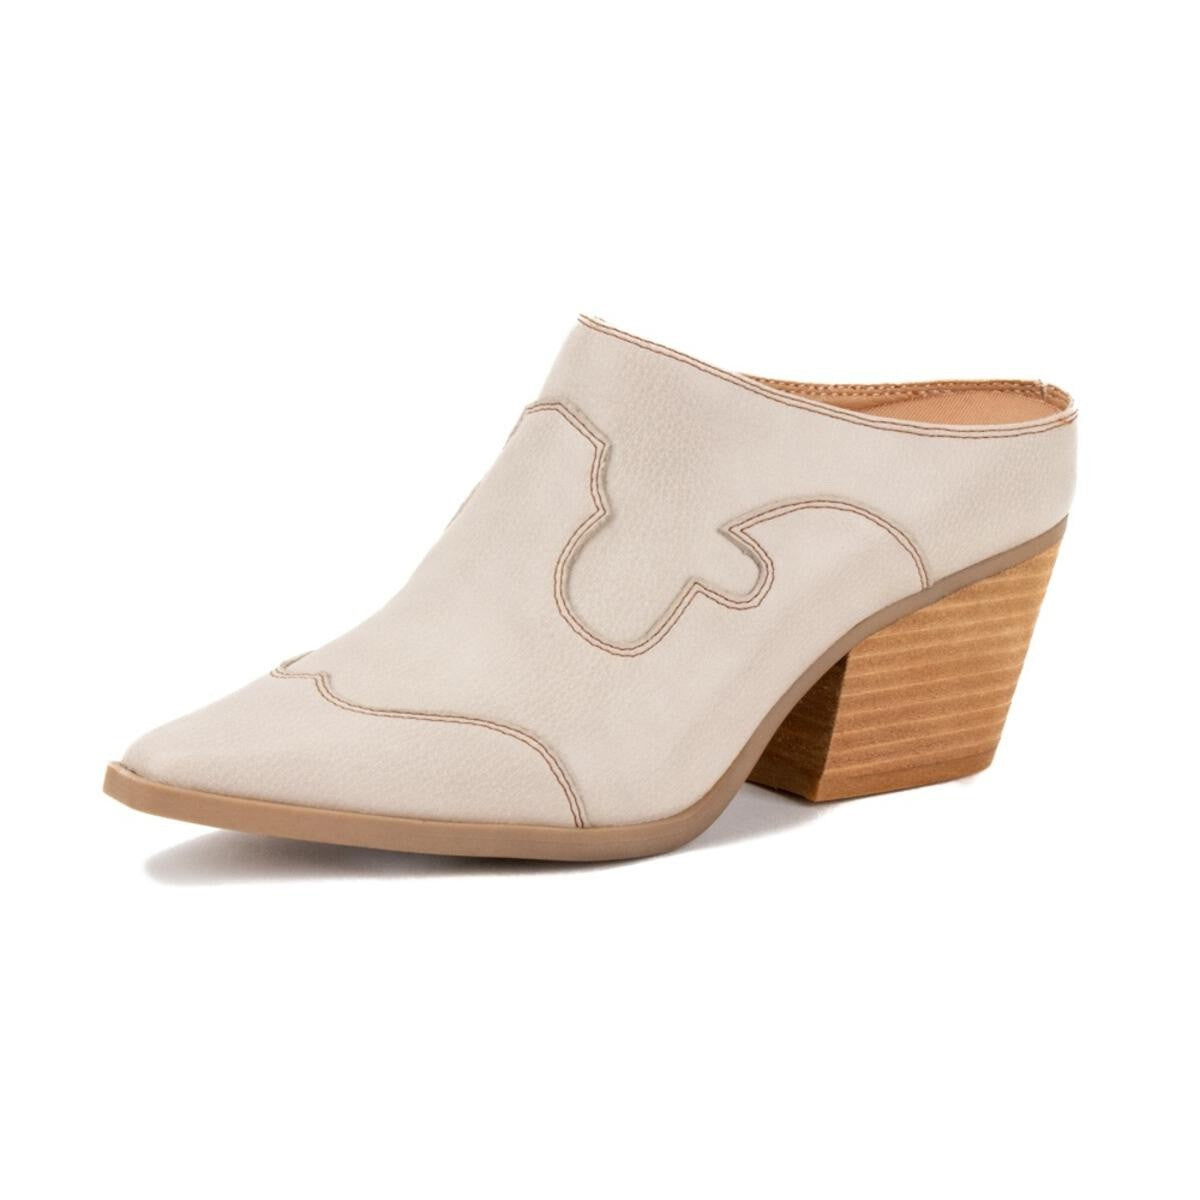 The Shay Western Mule